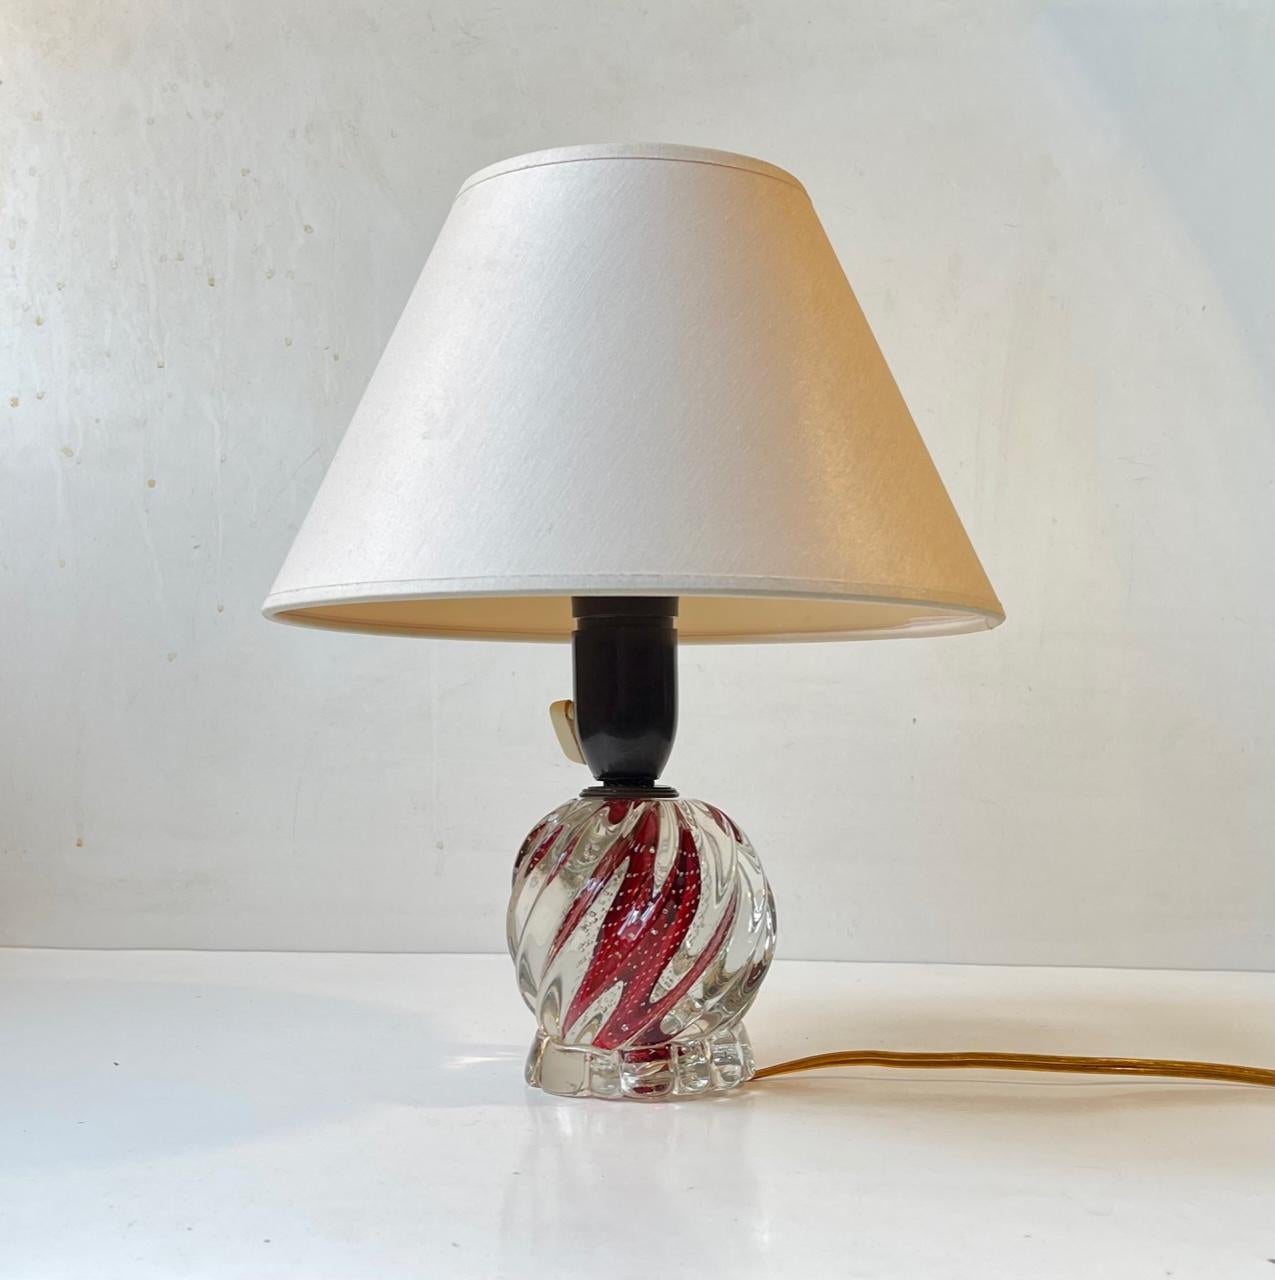 Small Murano Table Lamp in Twisted Glass with Internal Air-Bubbles, 1950s In Good Condition For Sale In Esbjerg, DK